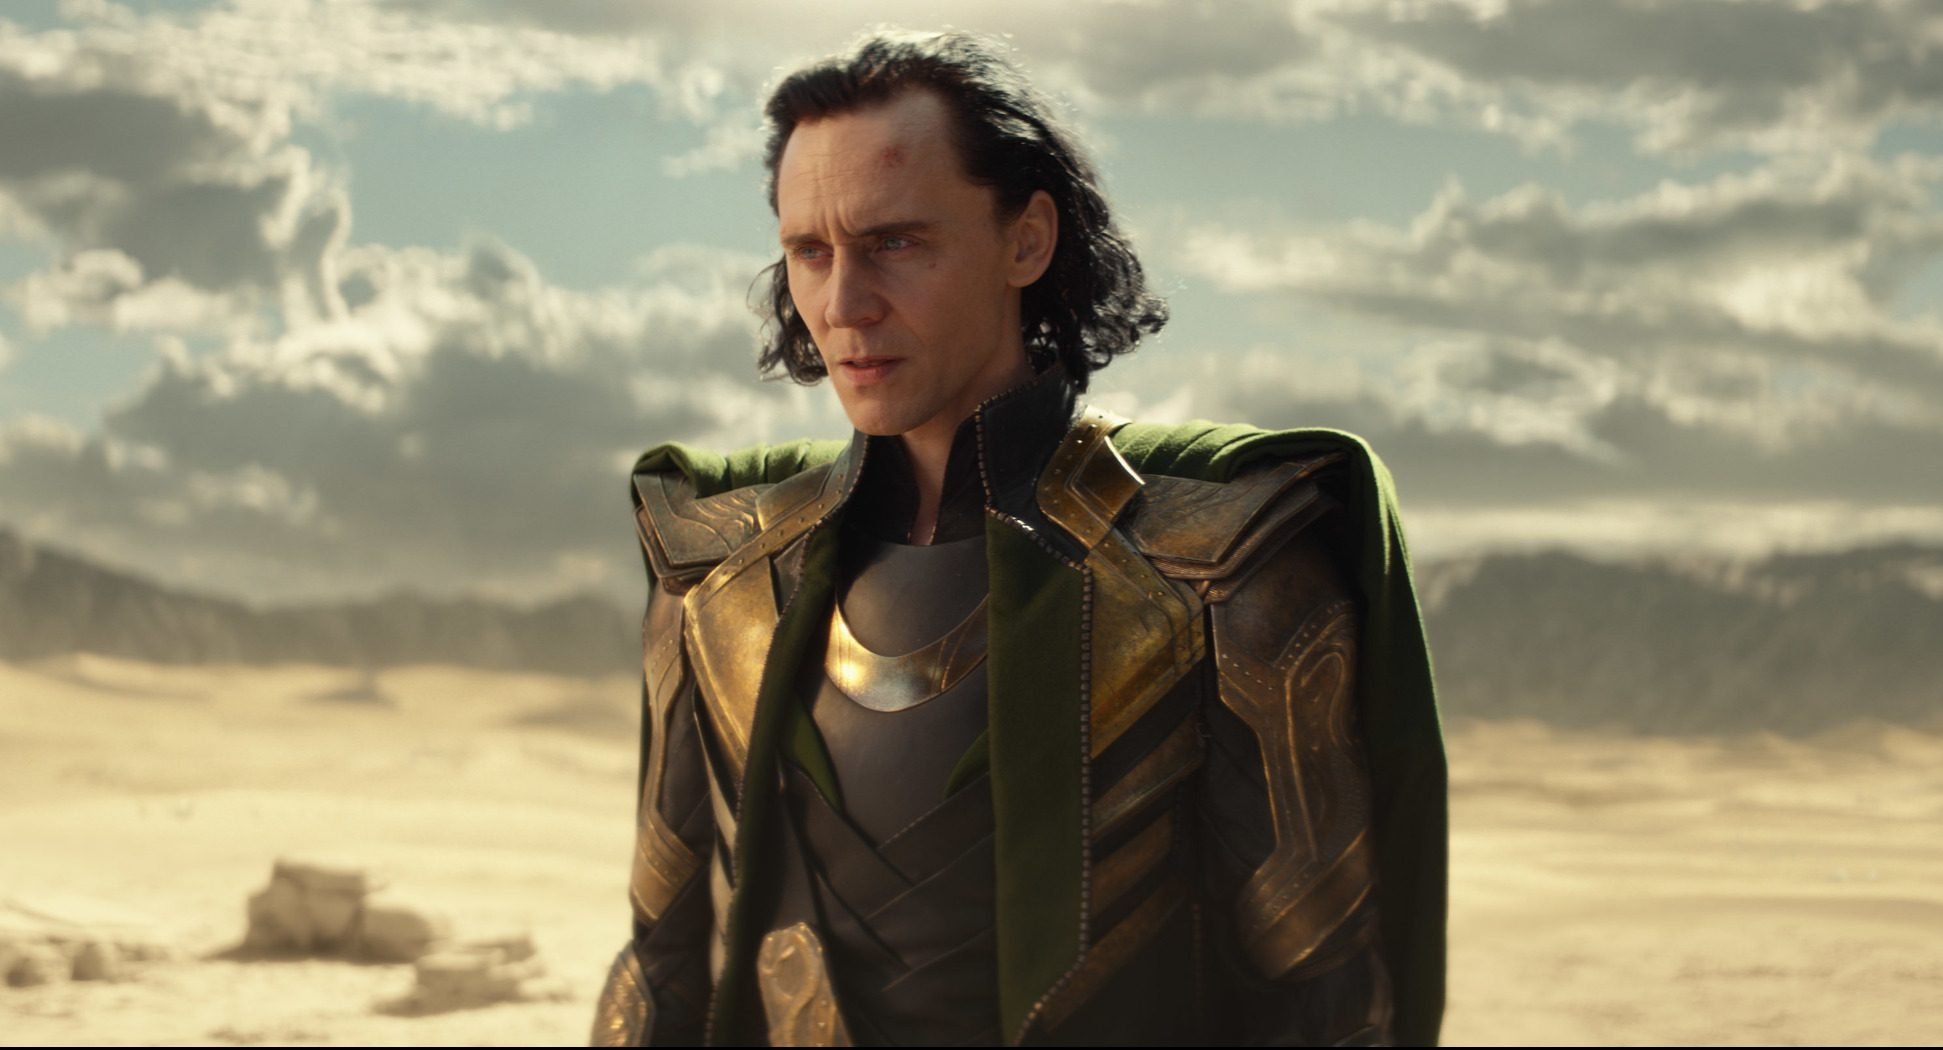 'Loki' star Tom Hiddleston standing in a desert landscape during the show's first episode